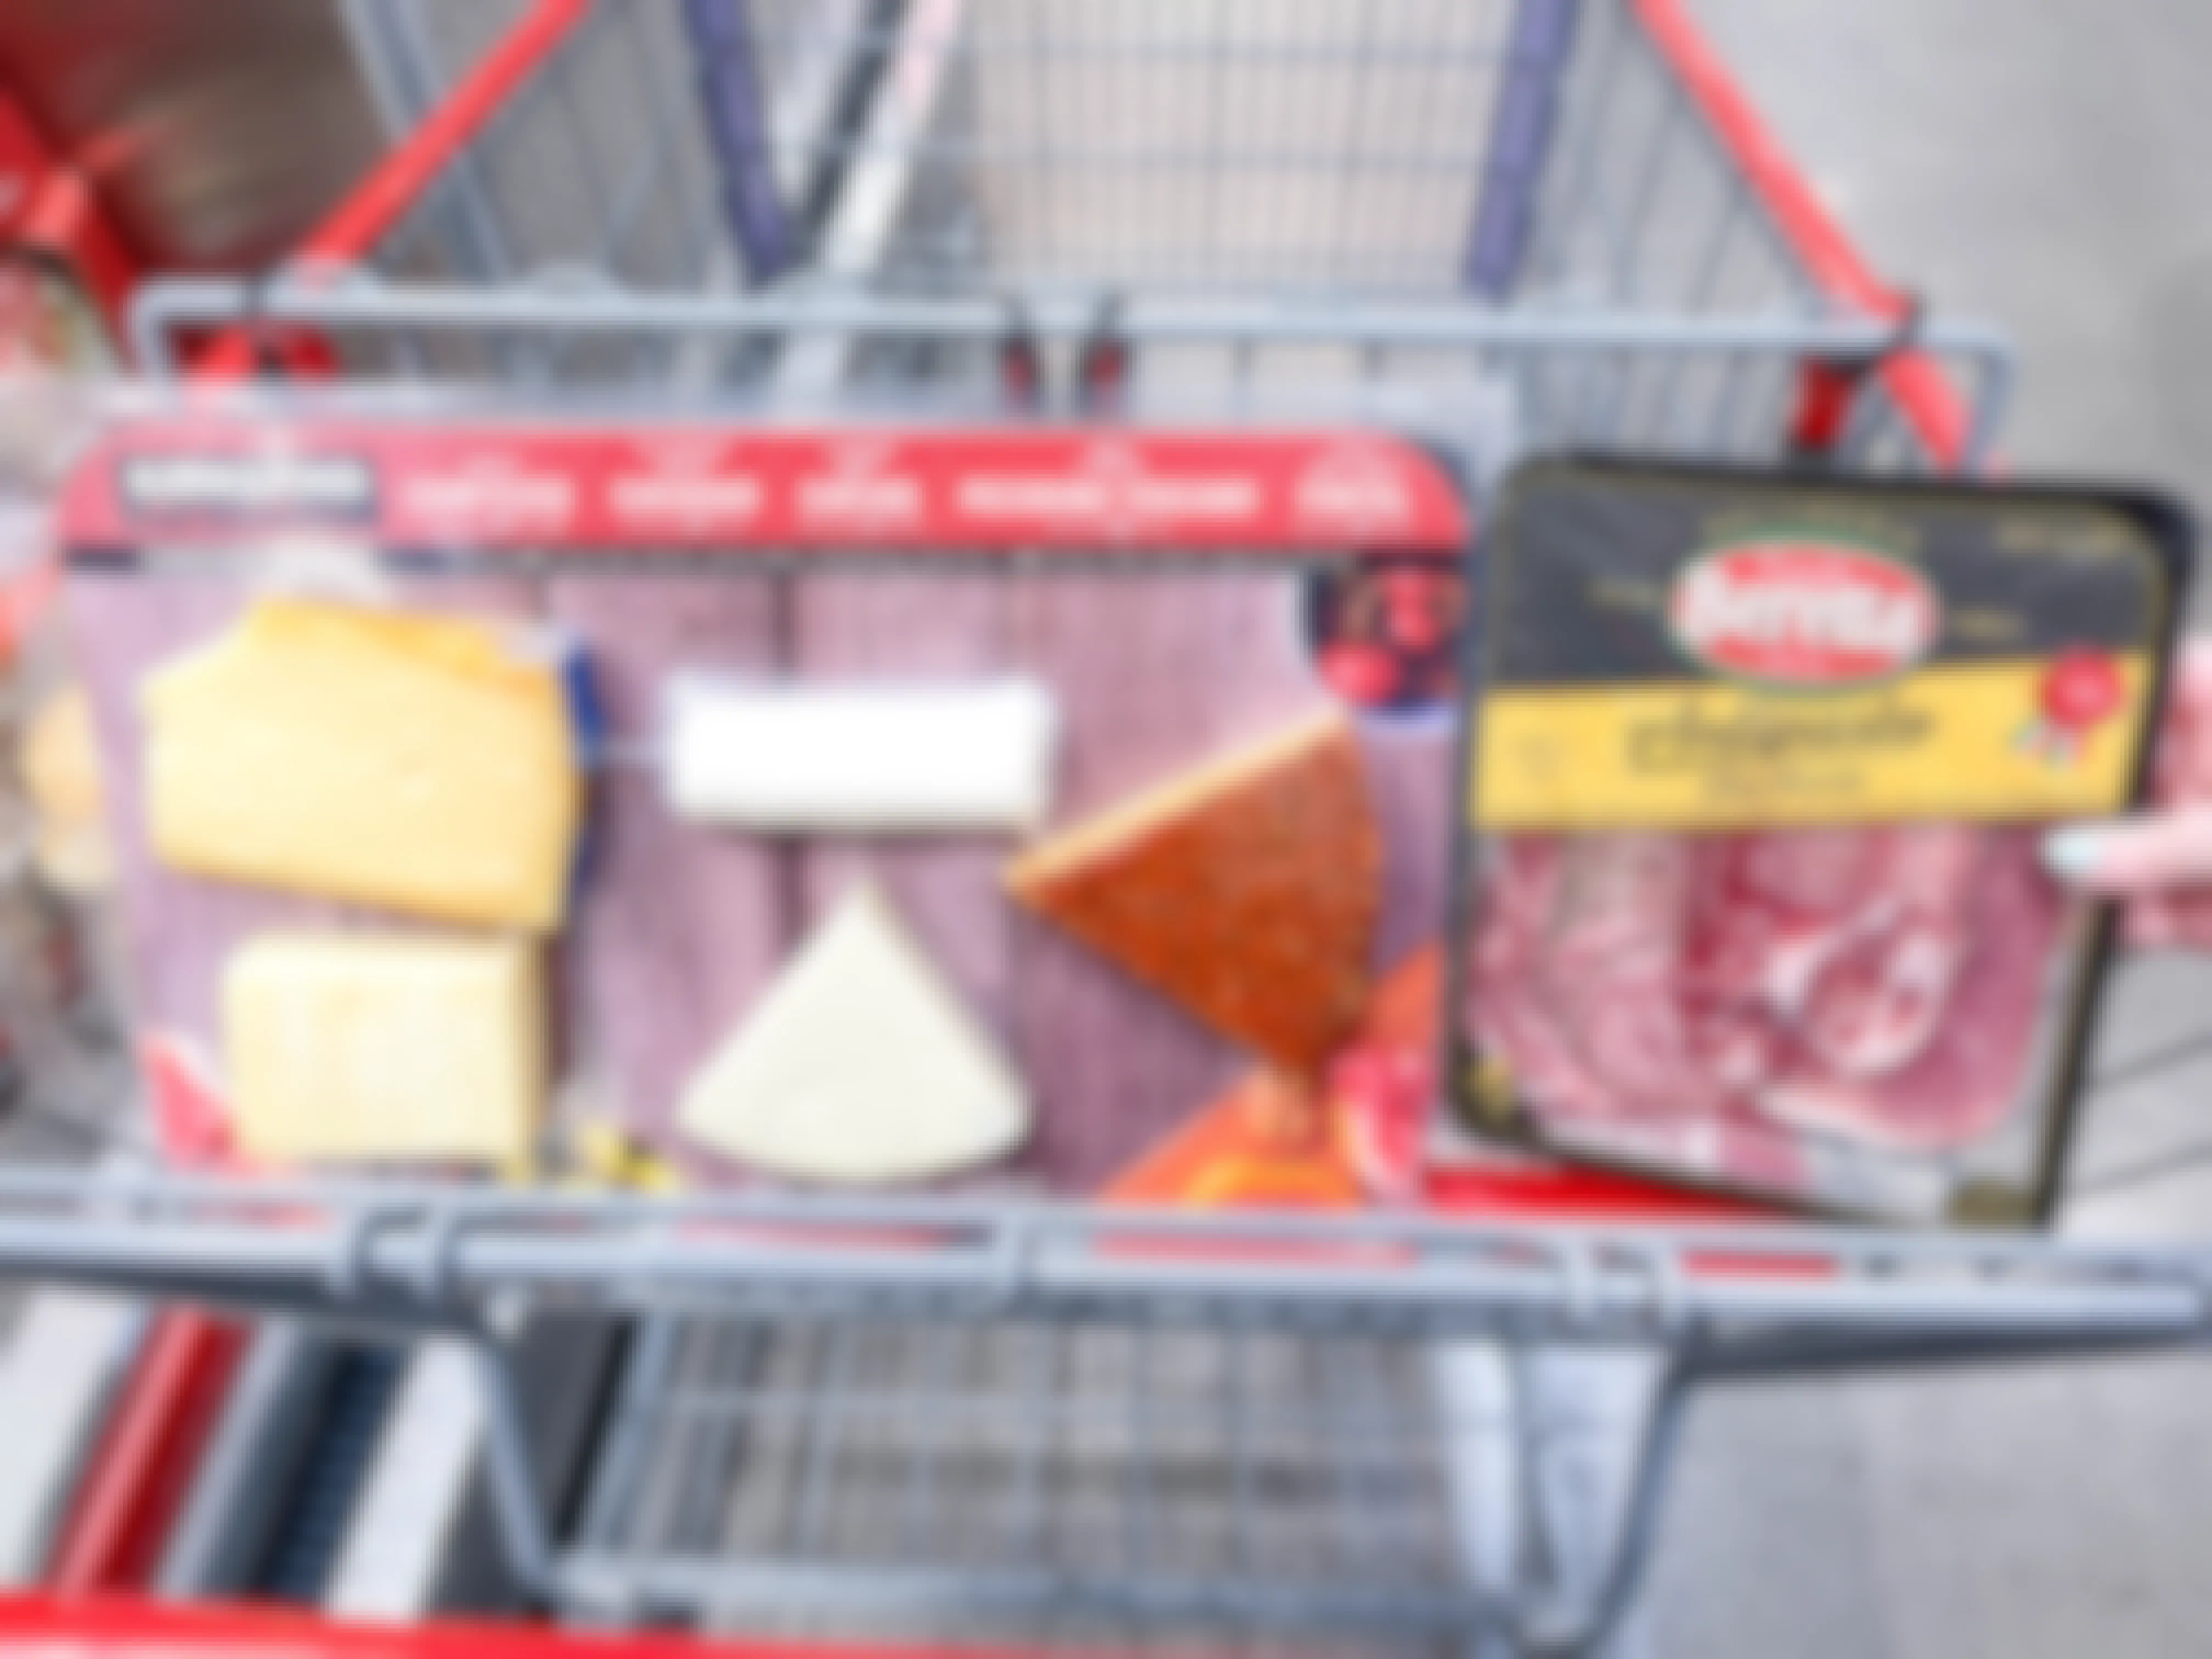 costco cart with meats and cheese